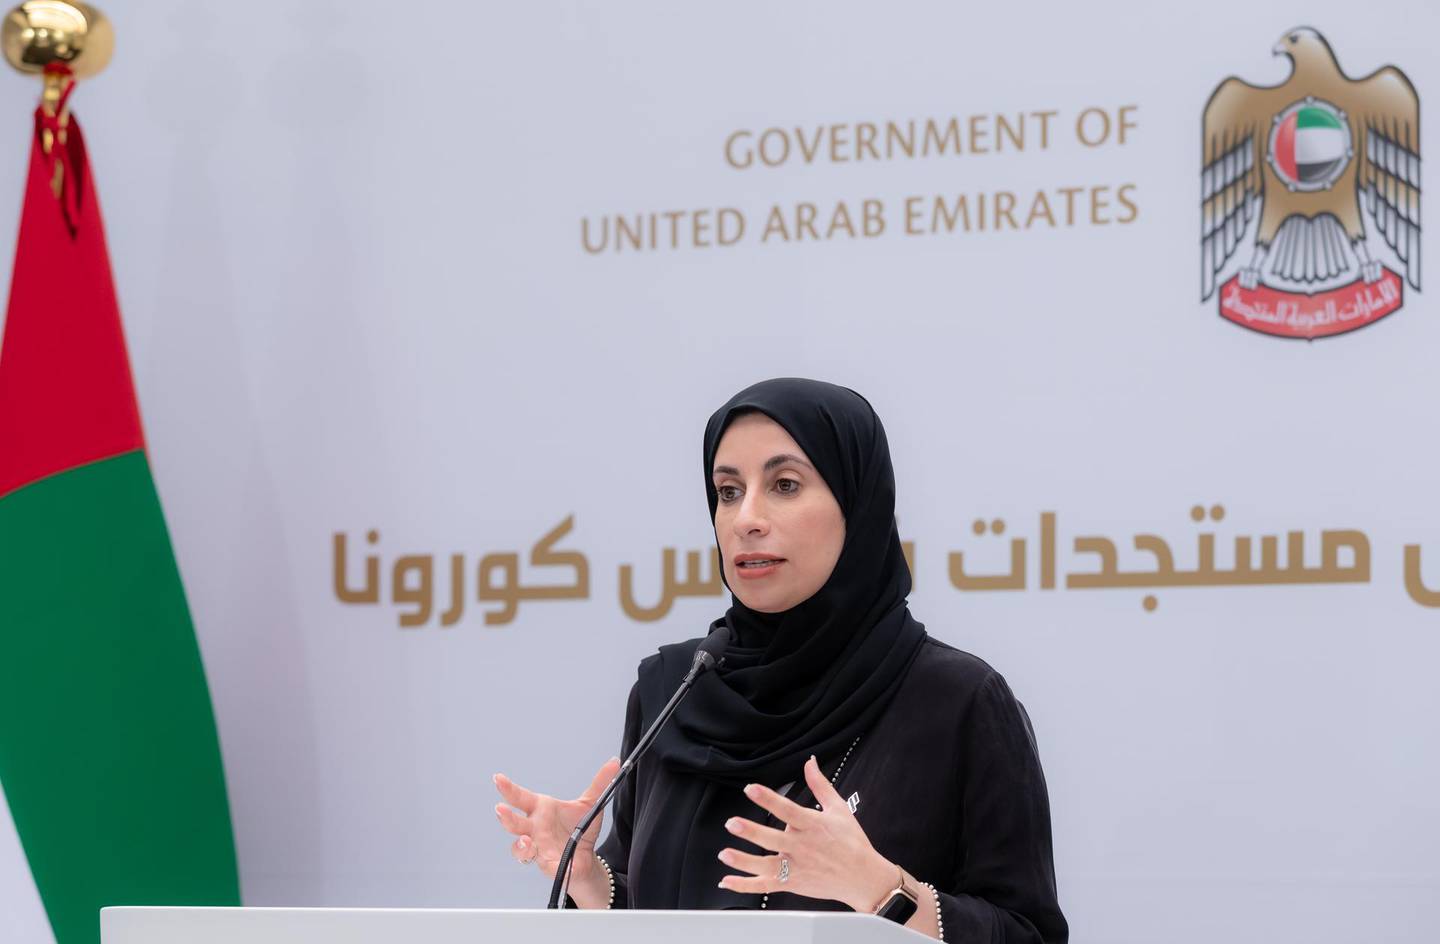 Dr Farida Al Hosani, official spokeswoman of the UAE health sector, said it is vital people are fully vaccinated before travelling outside of the country. National Media Council